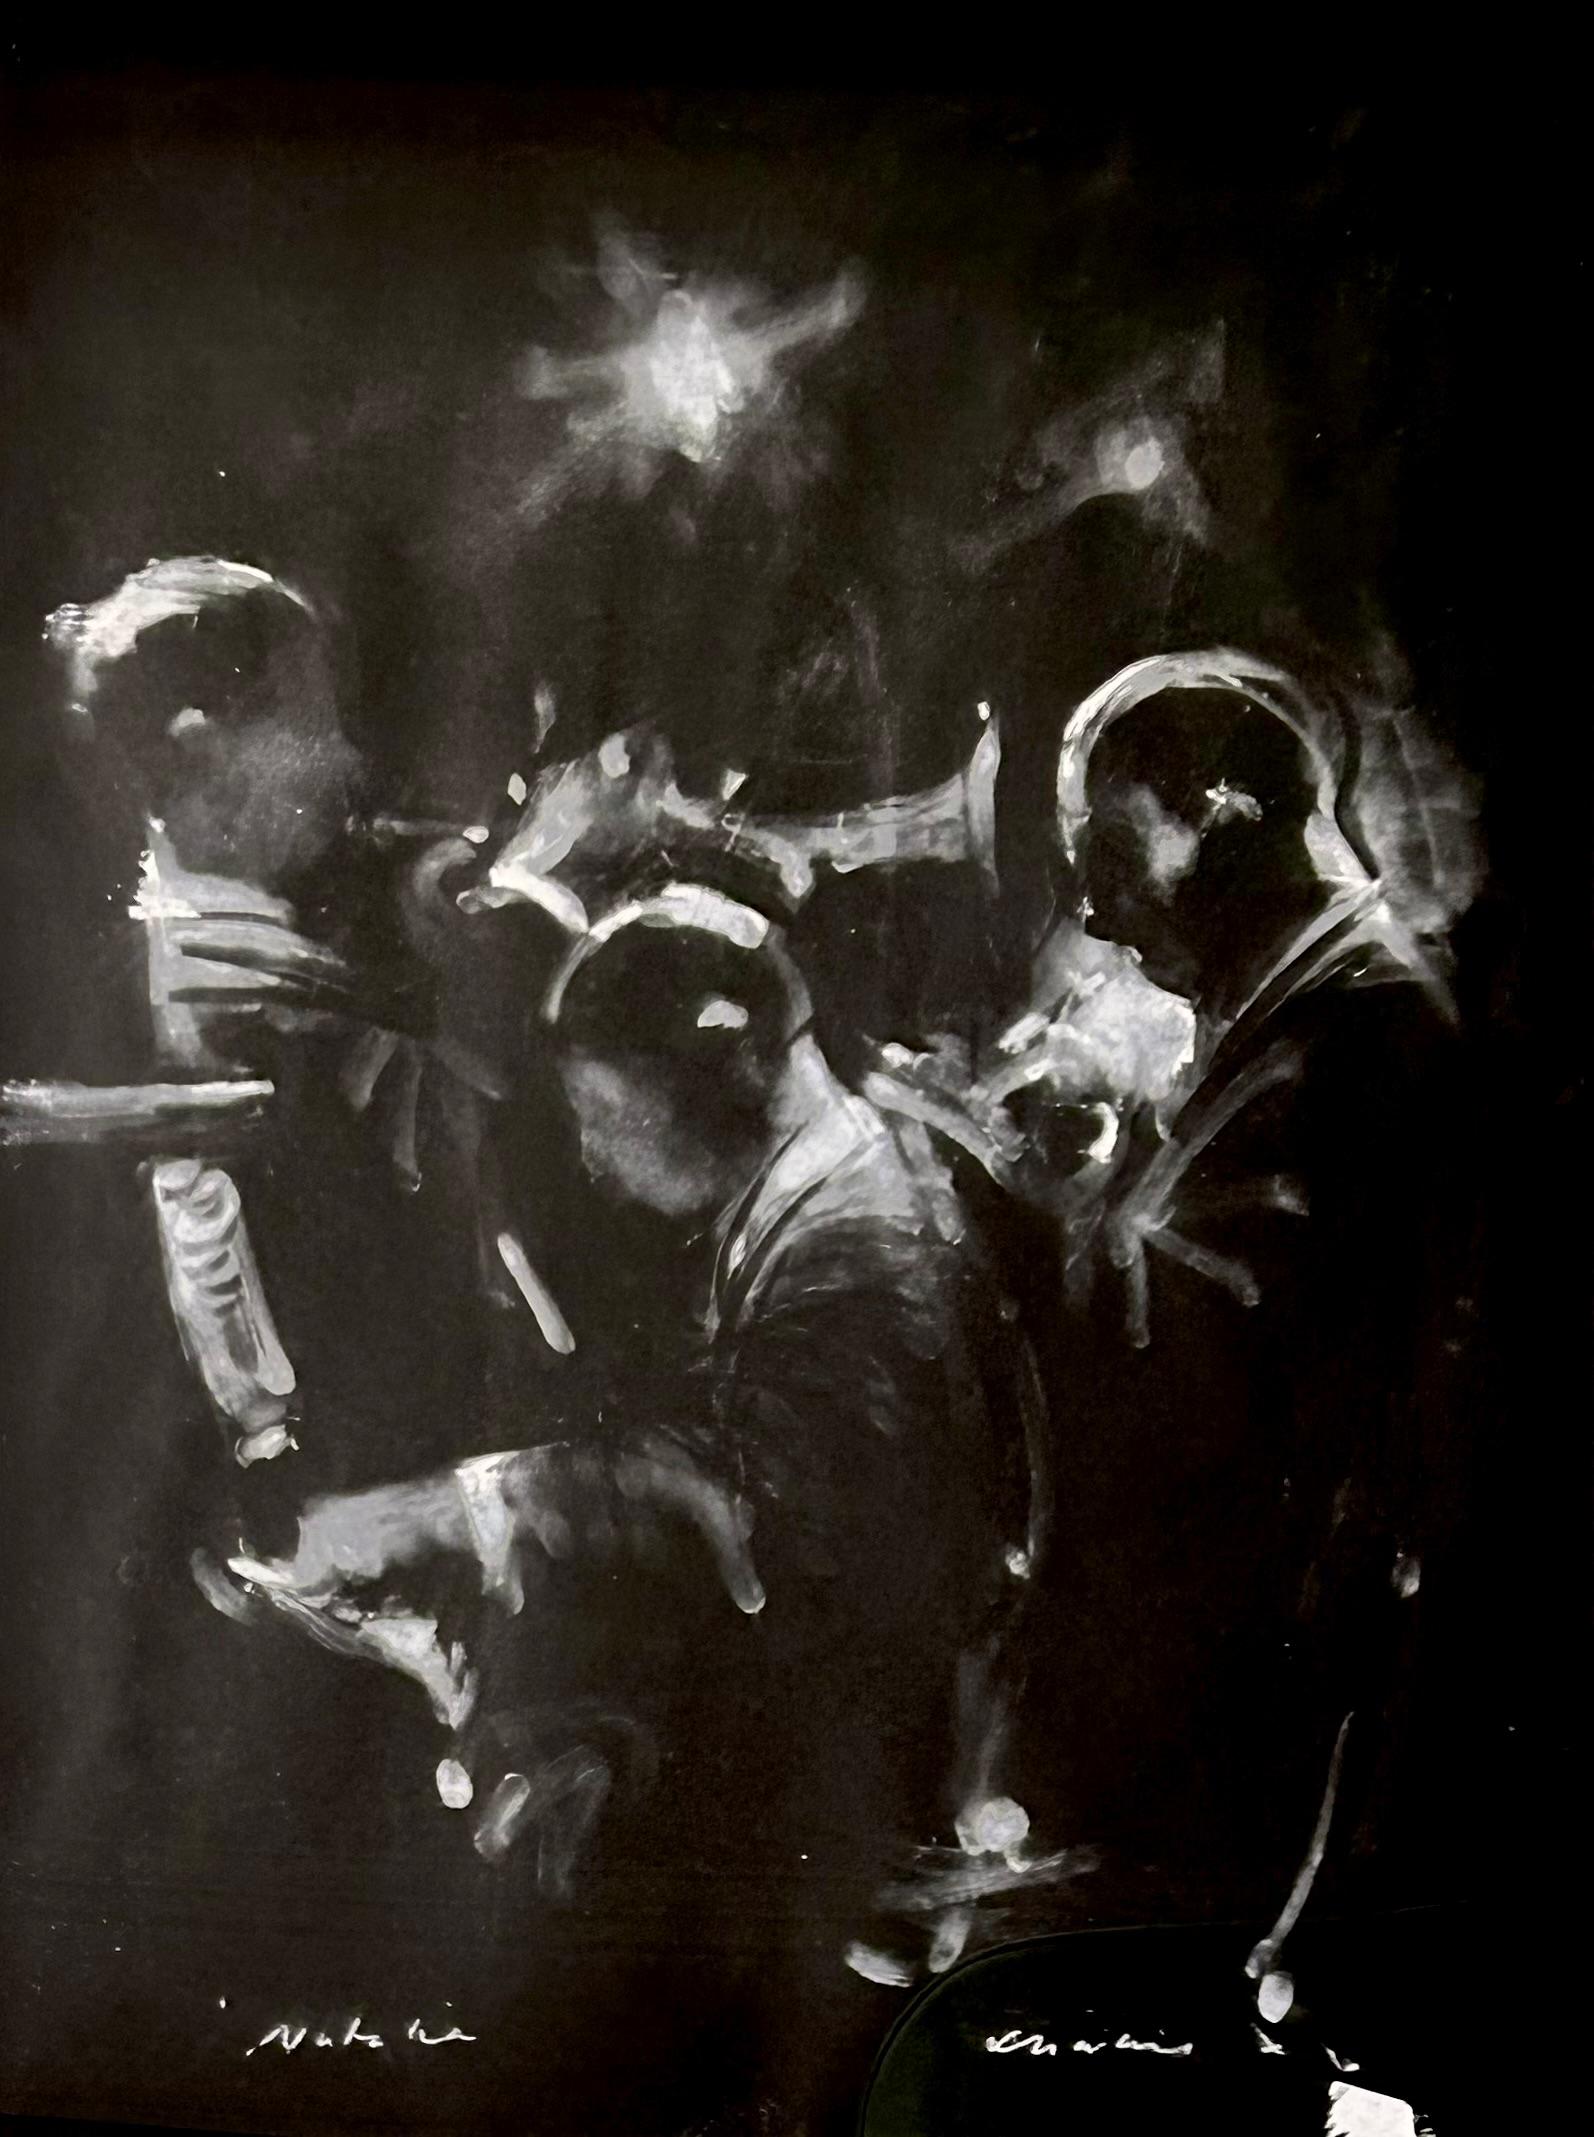 An original pastel-on-paper drawing by British artist Charlie Mackesy - Mackesy's clever work and style here, provide us with a glimpse into this atmospheric depiction of a Jazz Trio - The artist gives us 'piano-side' seats - creating an intimacy